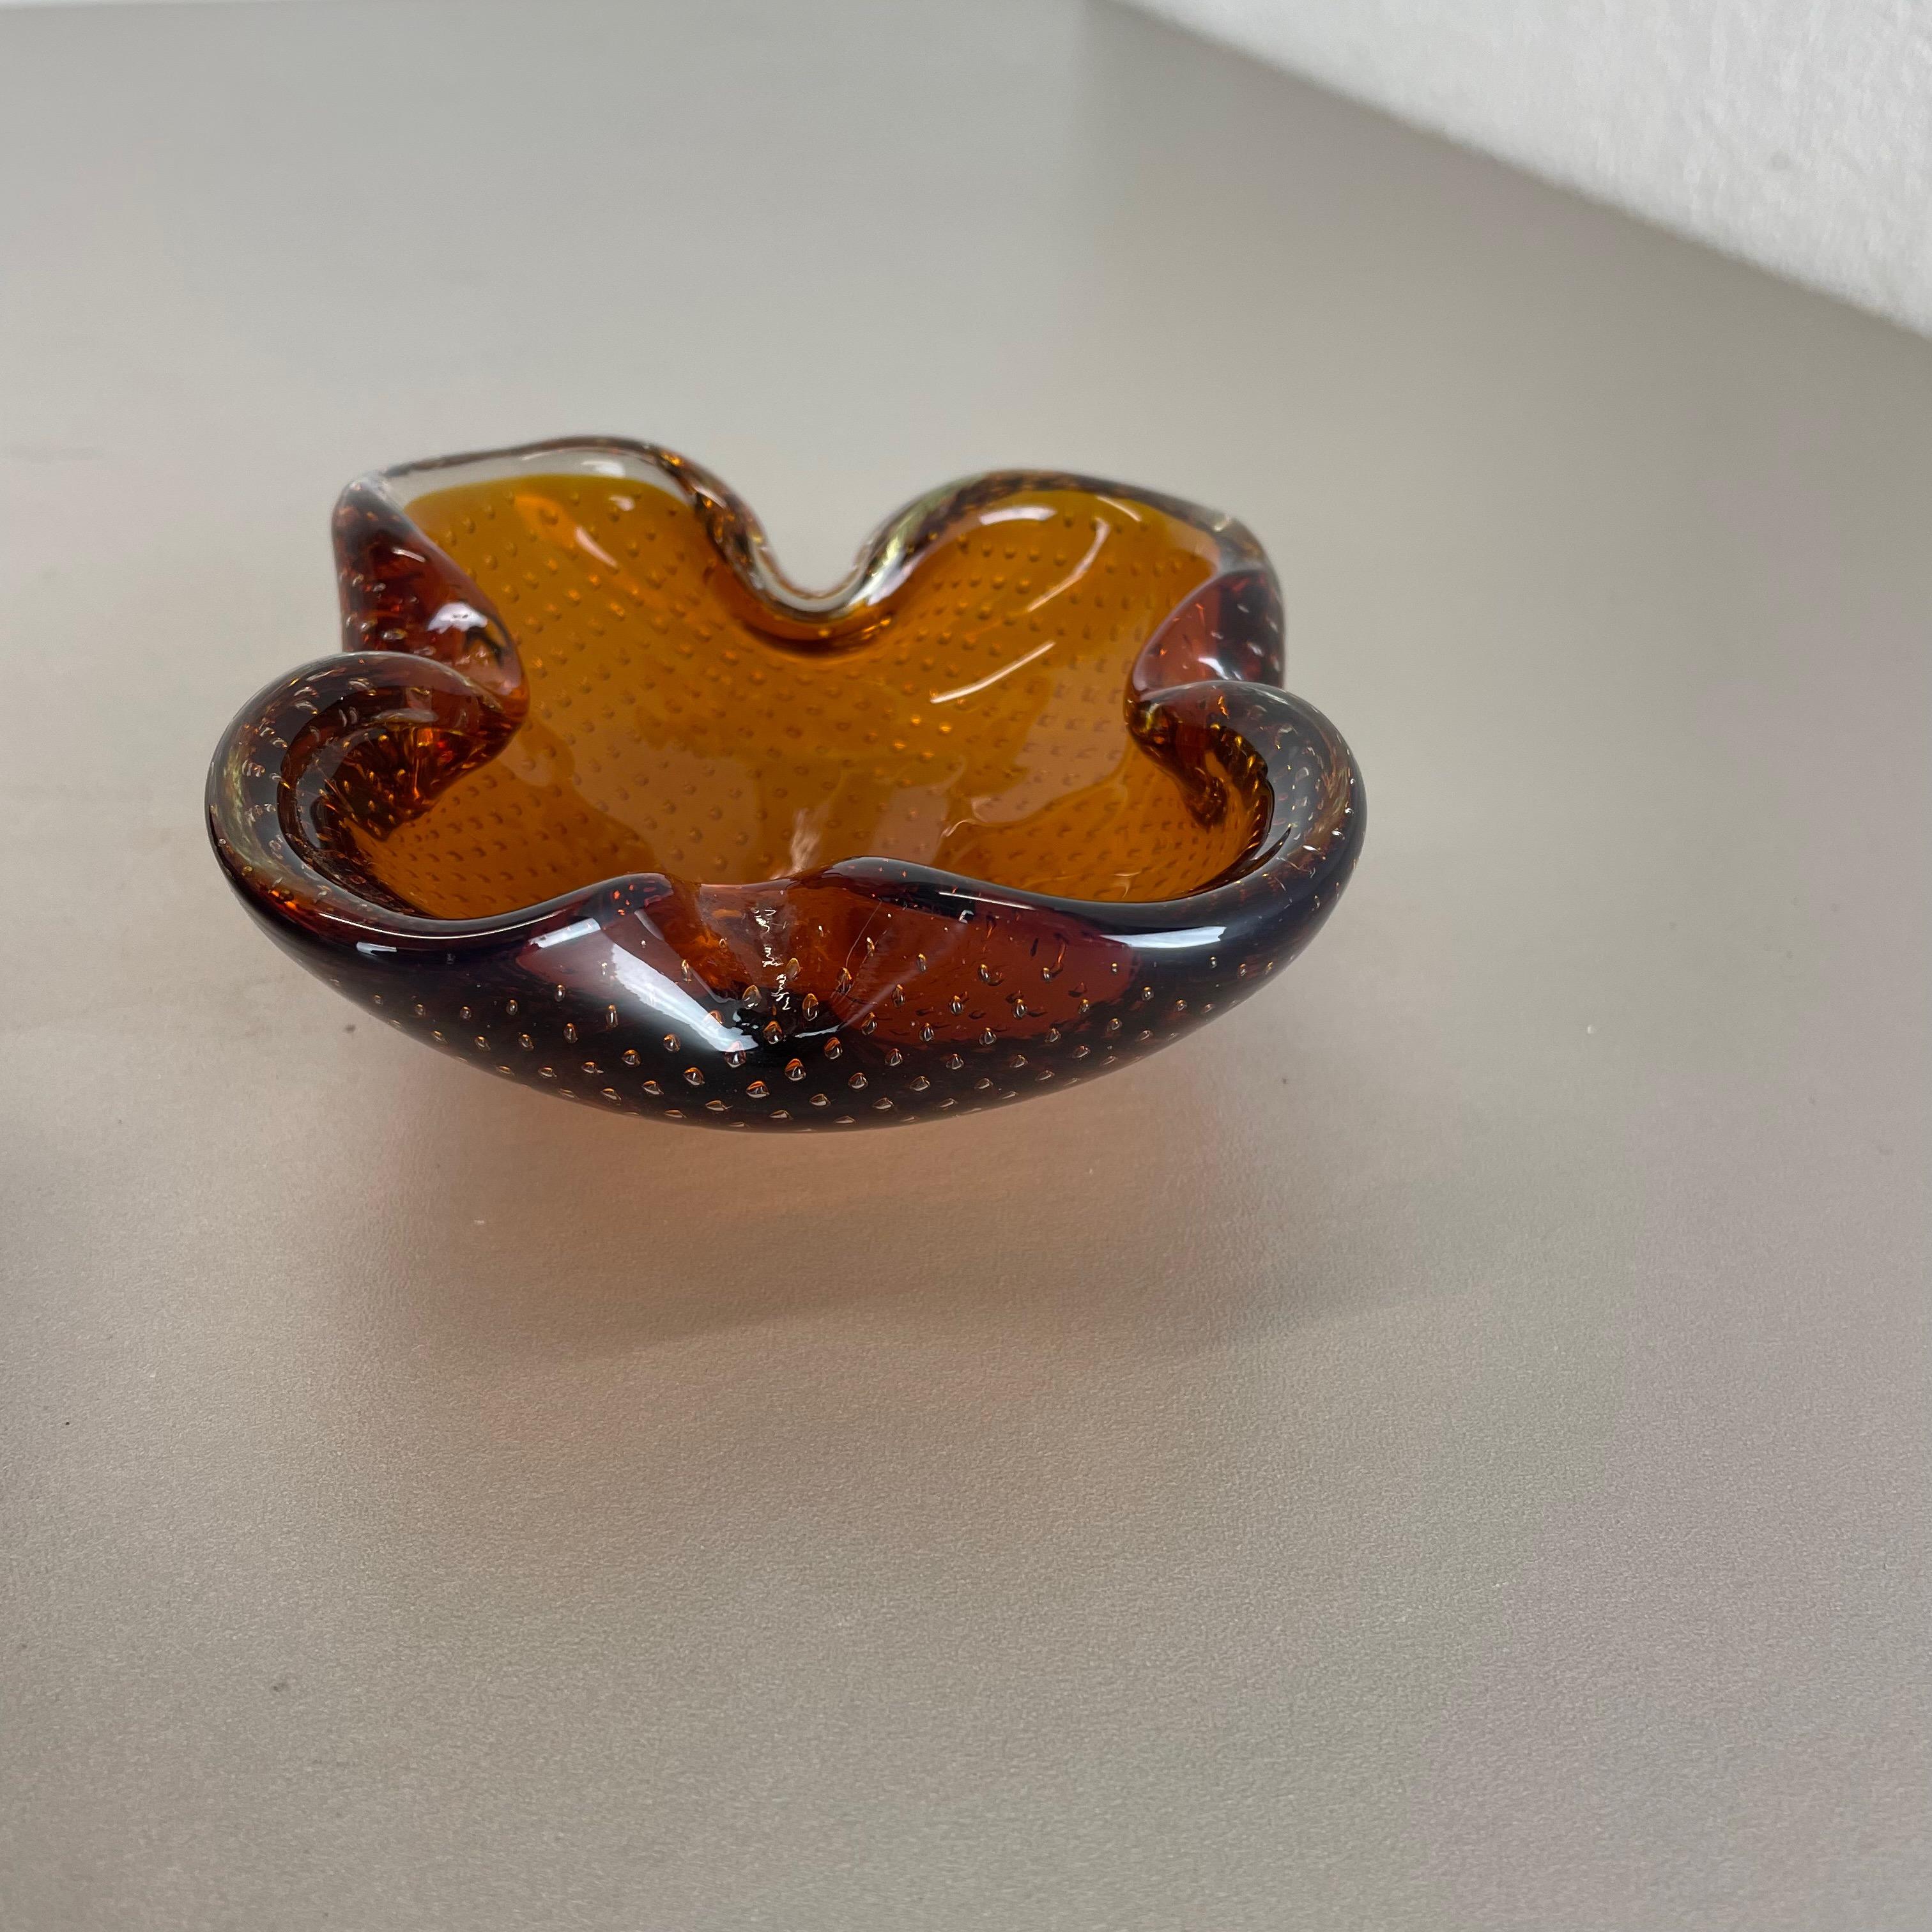 Set of 2 Murano Glass Bowl Shells Ashtray Element by Venini, Italy, 1970s For Sale 5